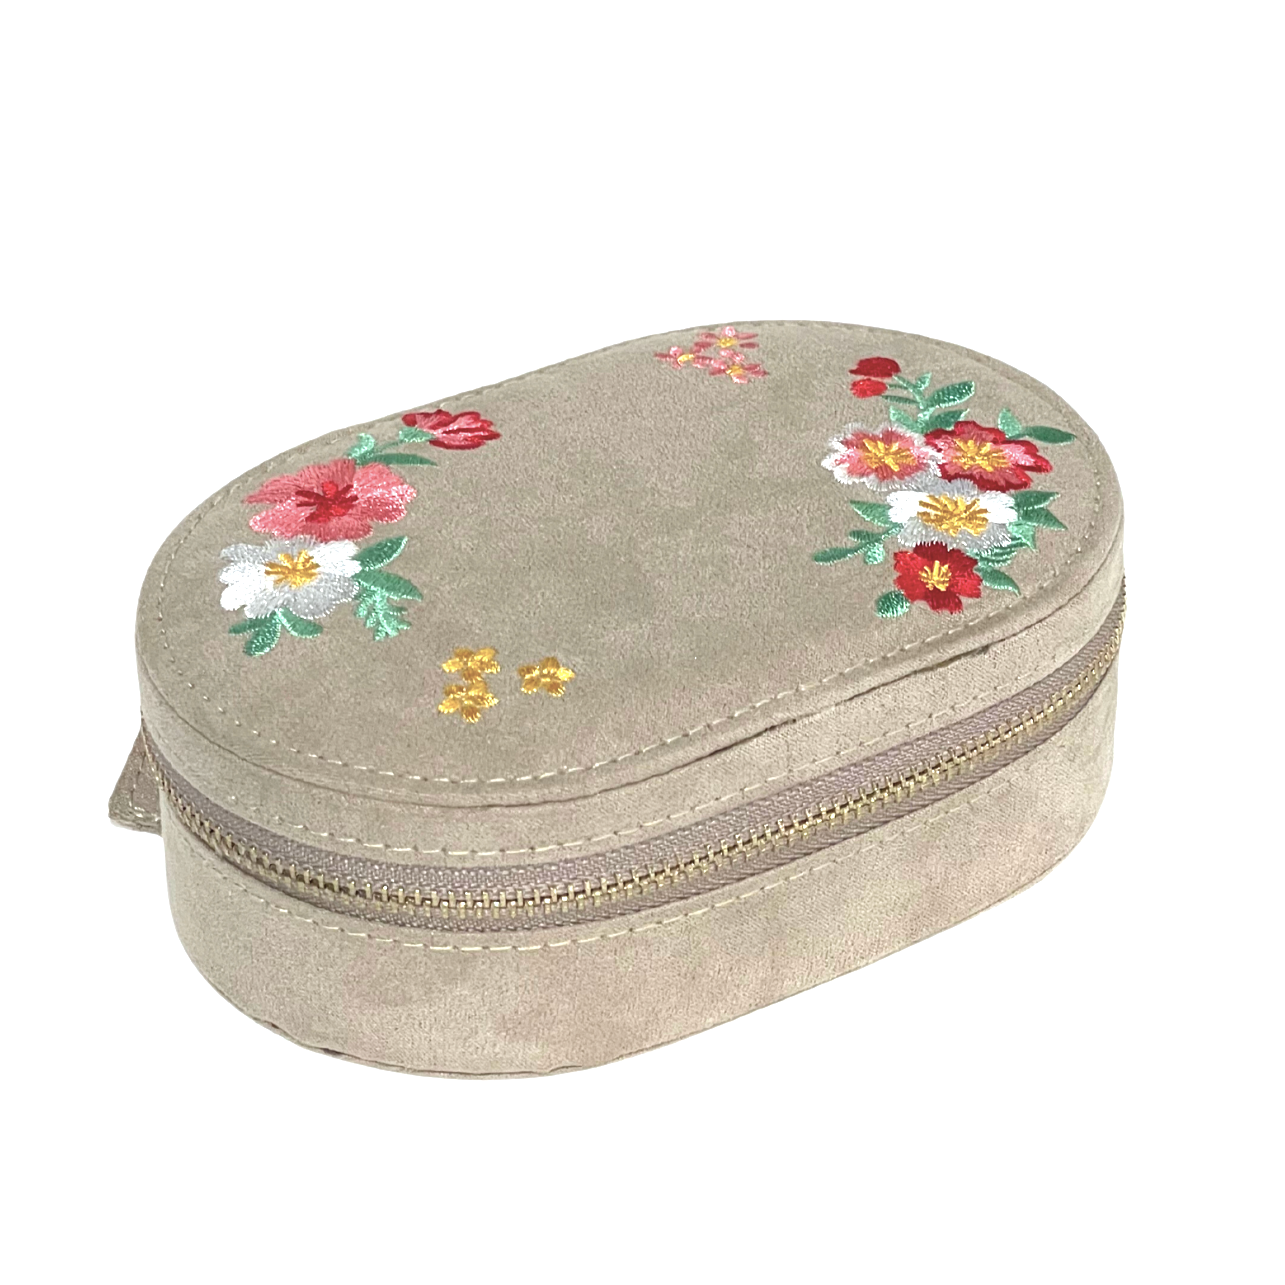 Travel Jewelry Case - Oval - Embroidered Beige